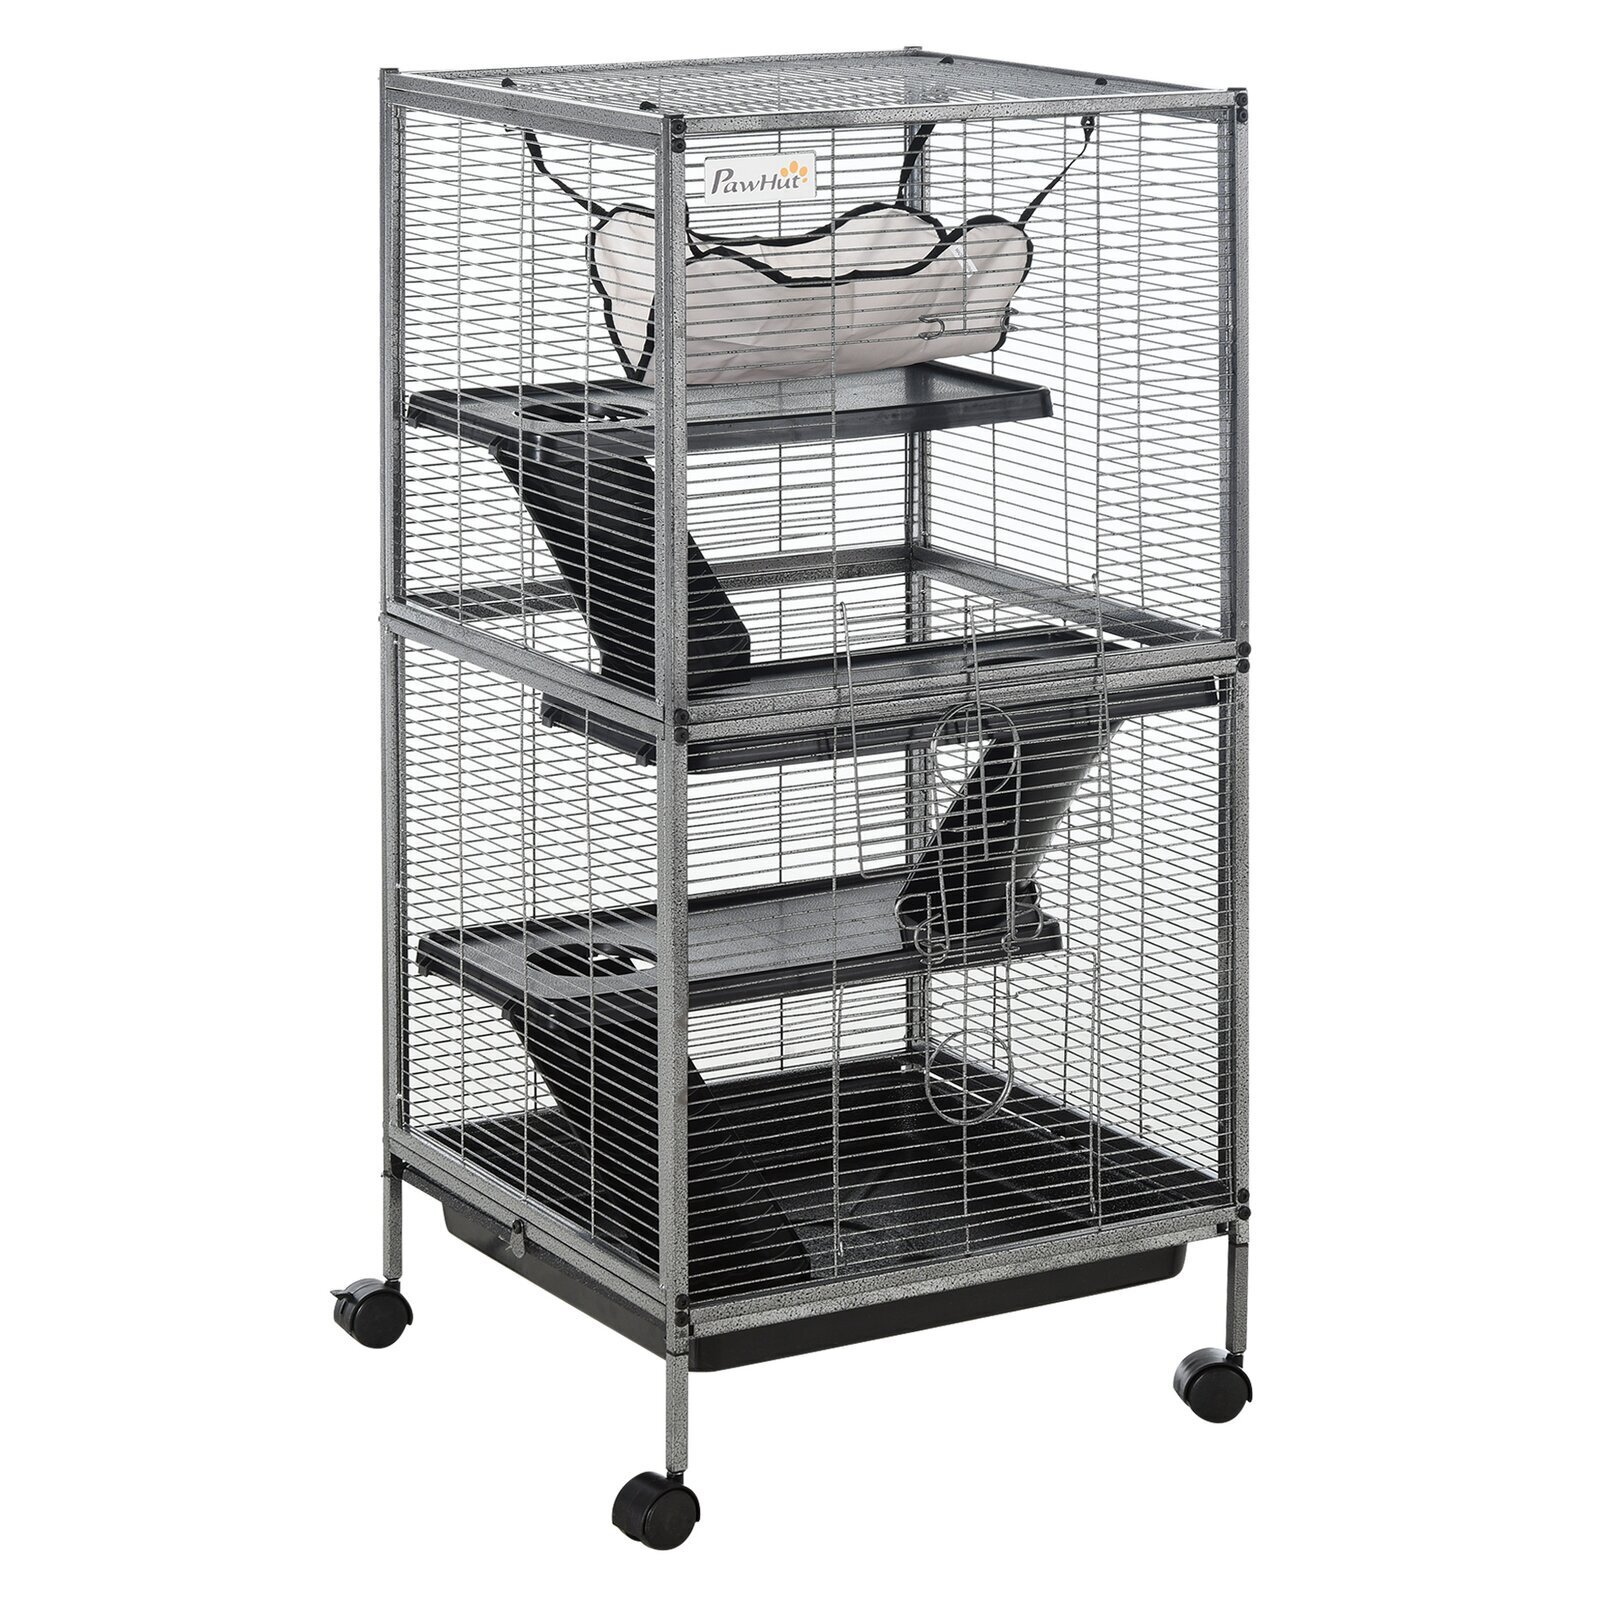 Upright Portable Animal Cage